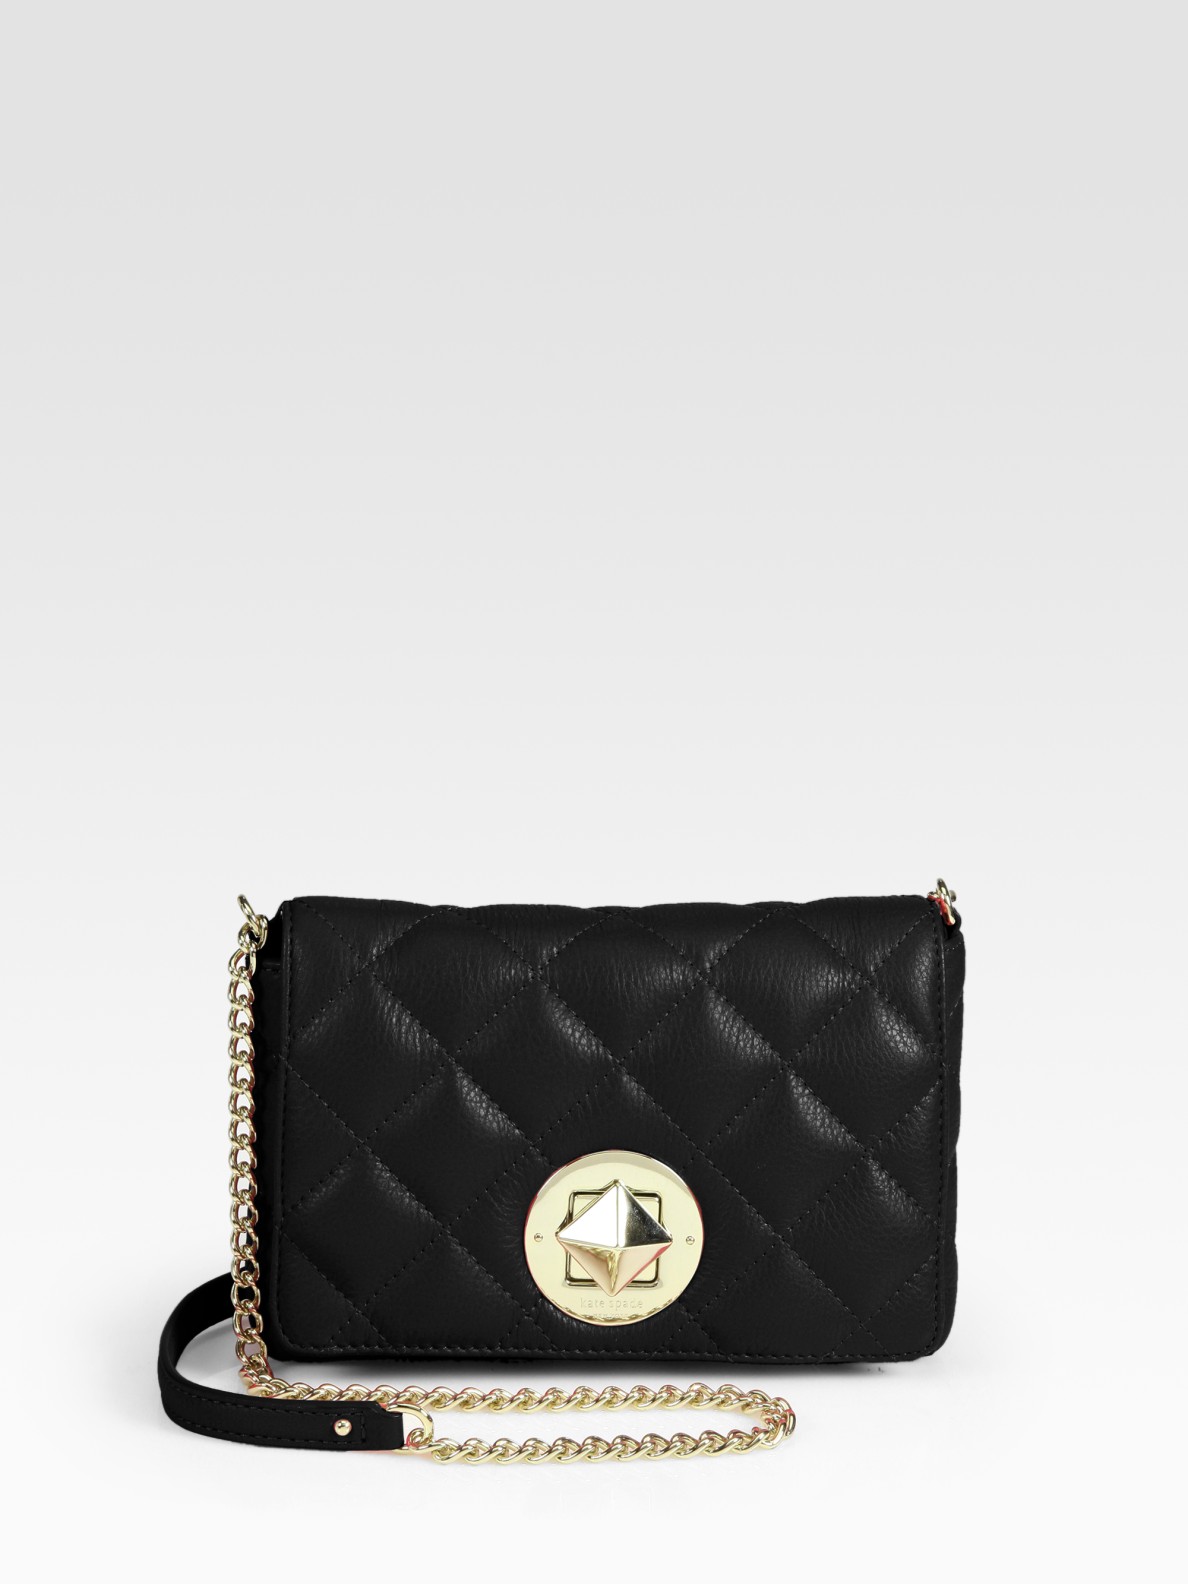 Lyst - Kate Spade New York Dove Quilted Leather Chain Crossbody in Black